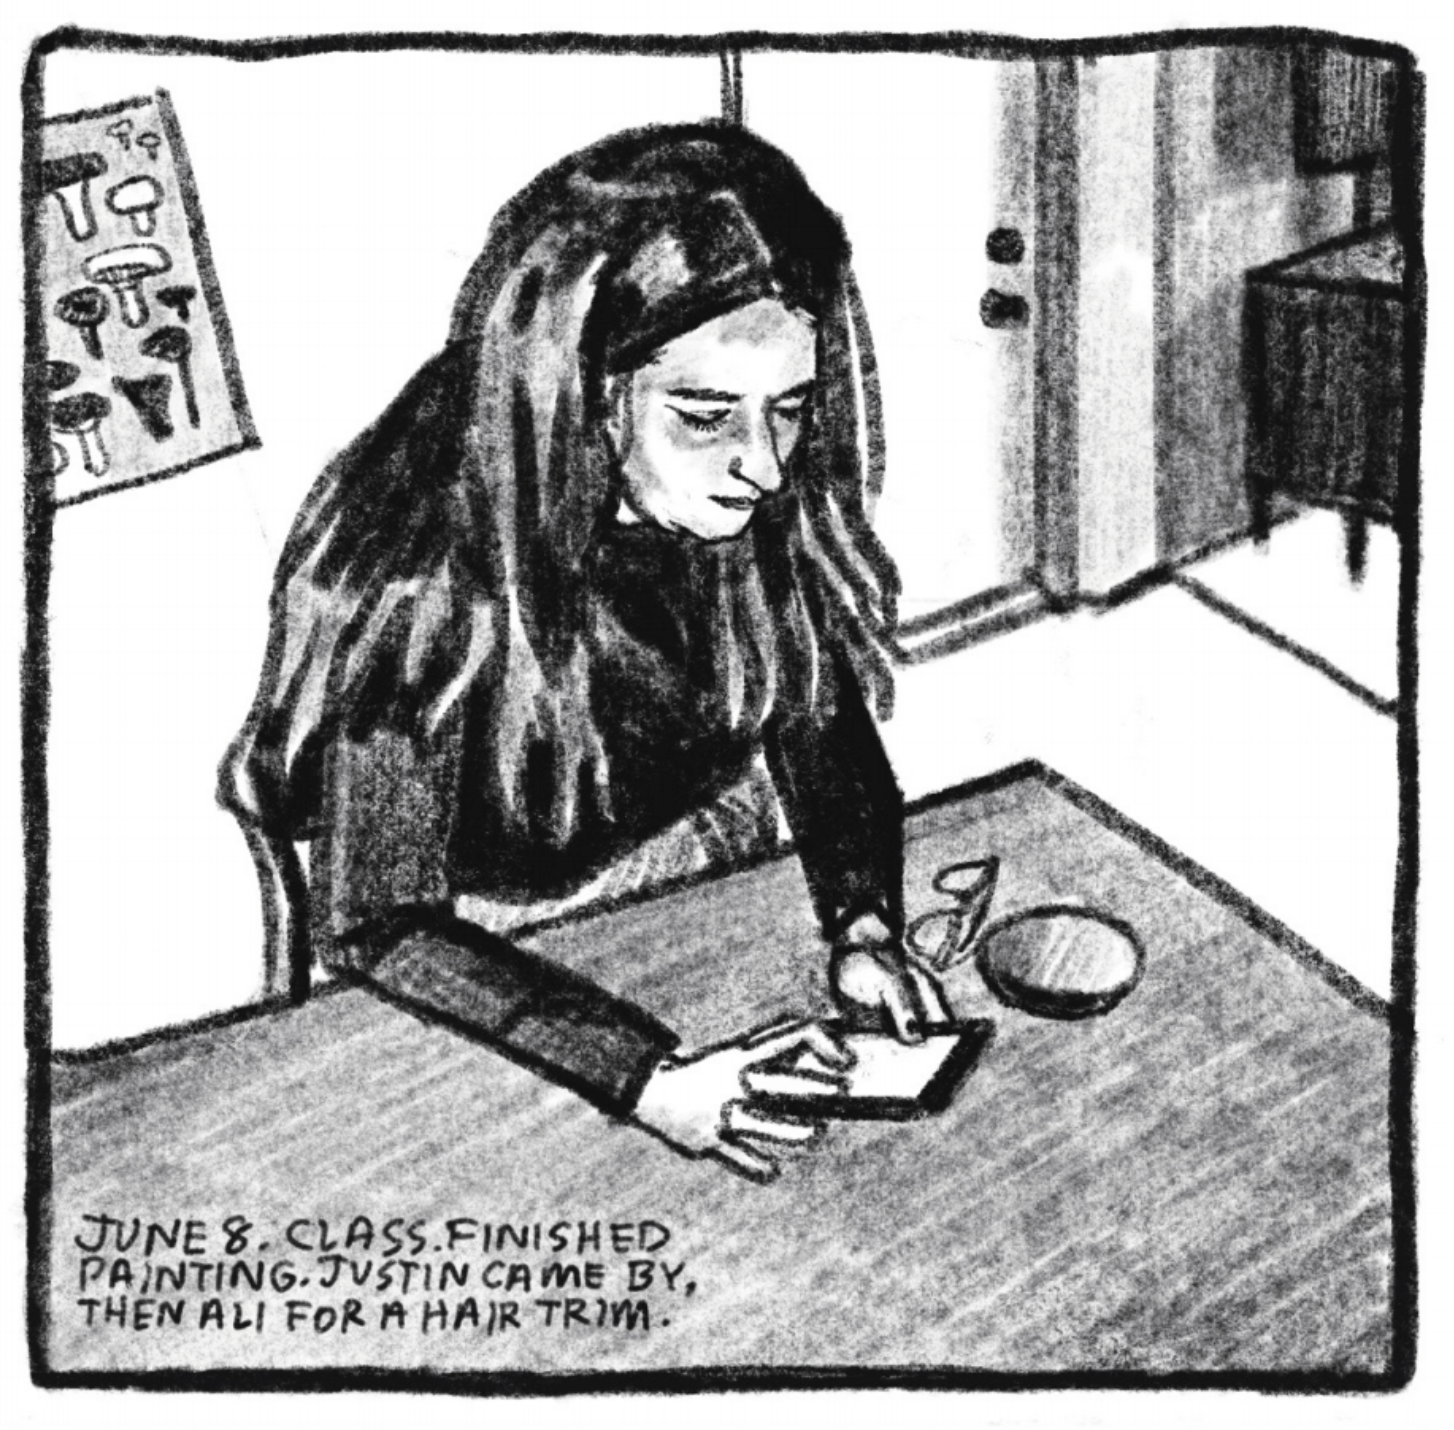 1. A woman with long, dark hair worn down sits at a table. Her arms are rested on the table and she is using her phone. Next to her are a compact mirror and a pair of glasses. There is a mushroom poster on the wall behind her. â€œJune 8. Class. Finished painting. Justin came by, then Ali for a hair trim.â€